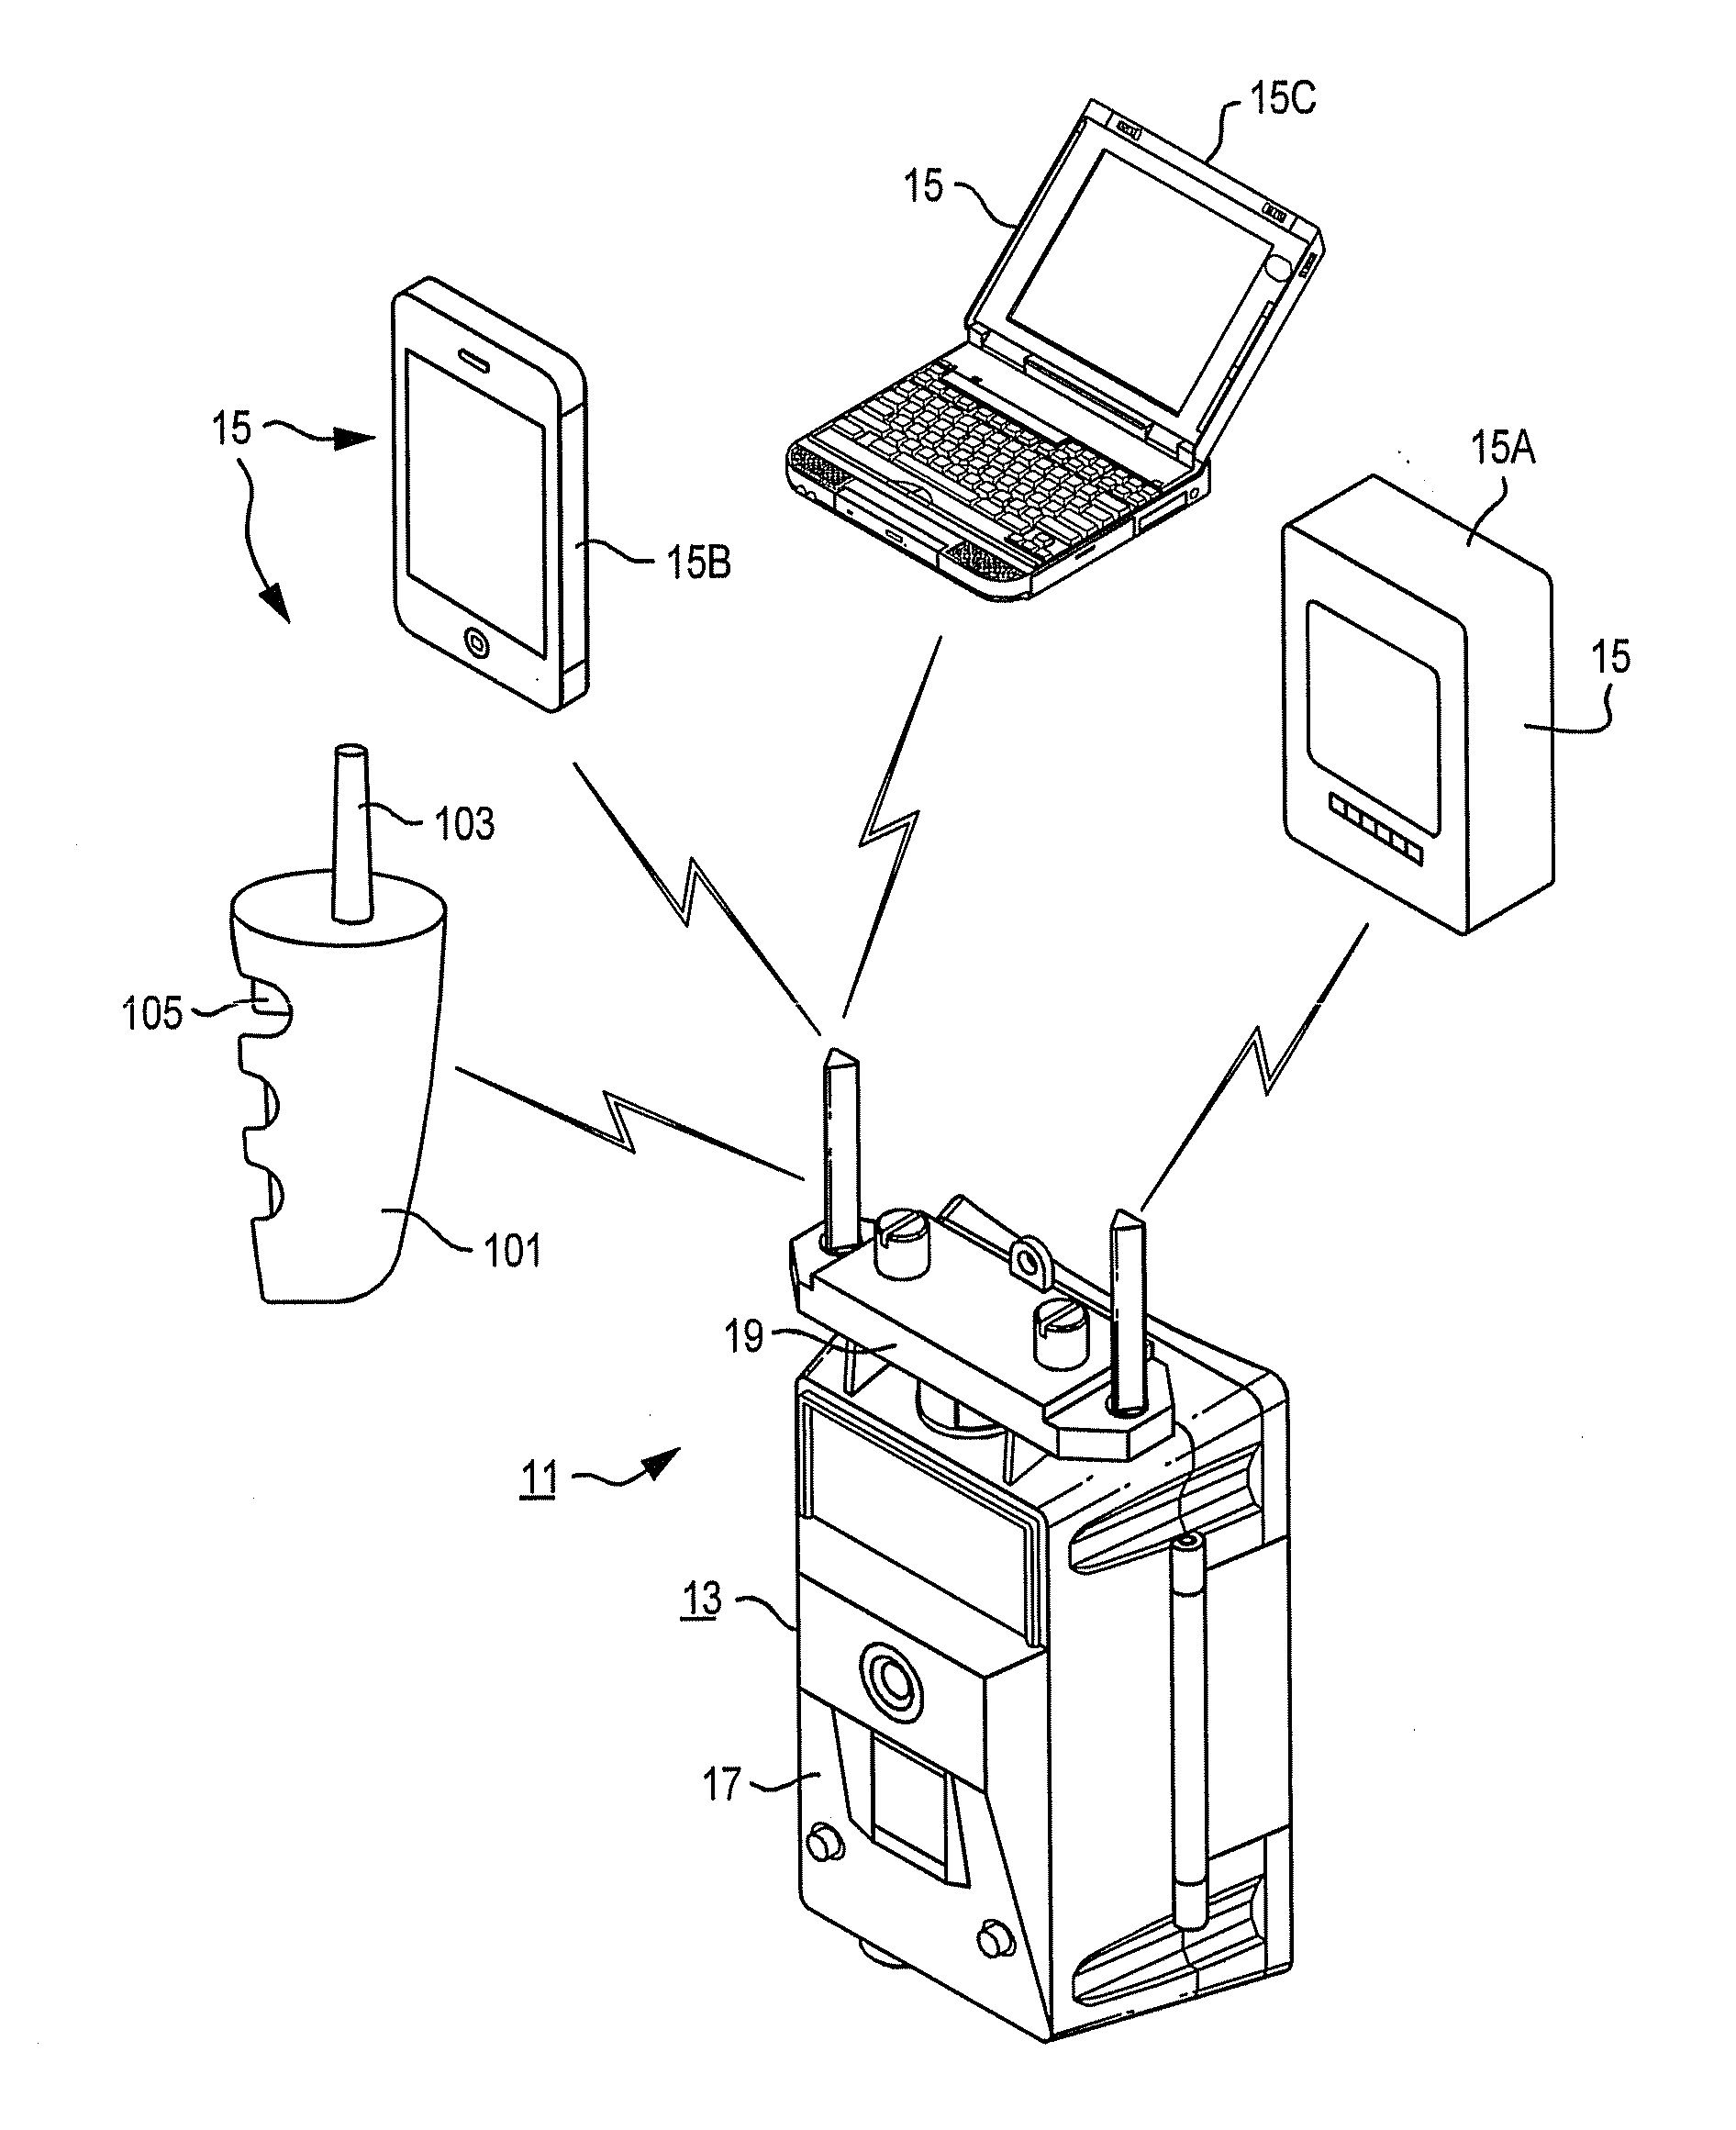 Surveillance camera with wireless communication and control capability